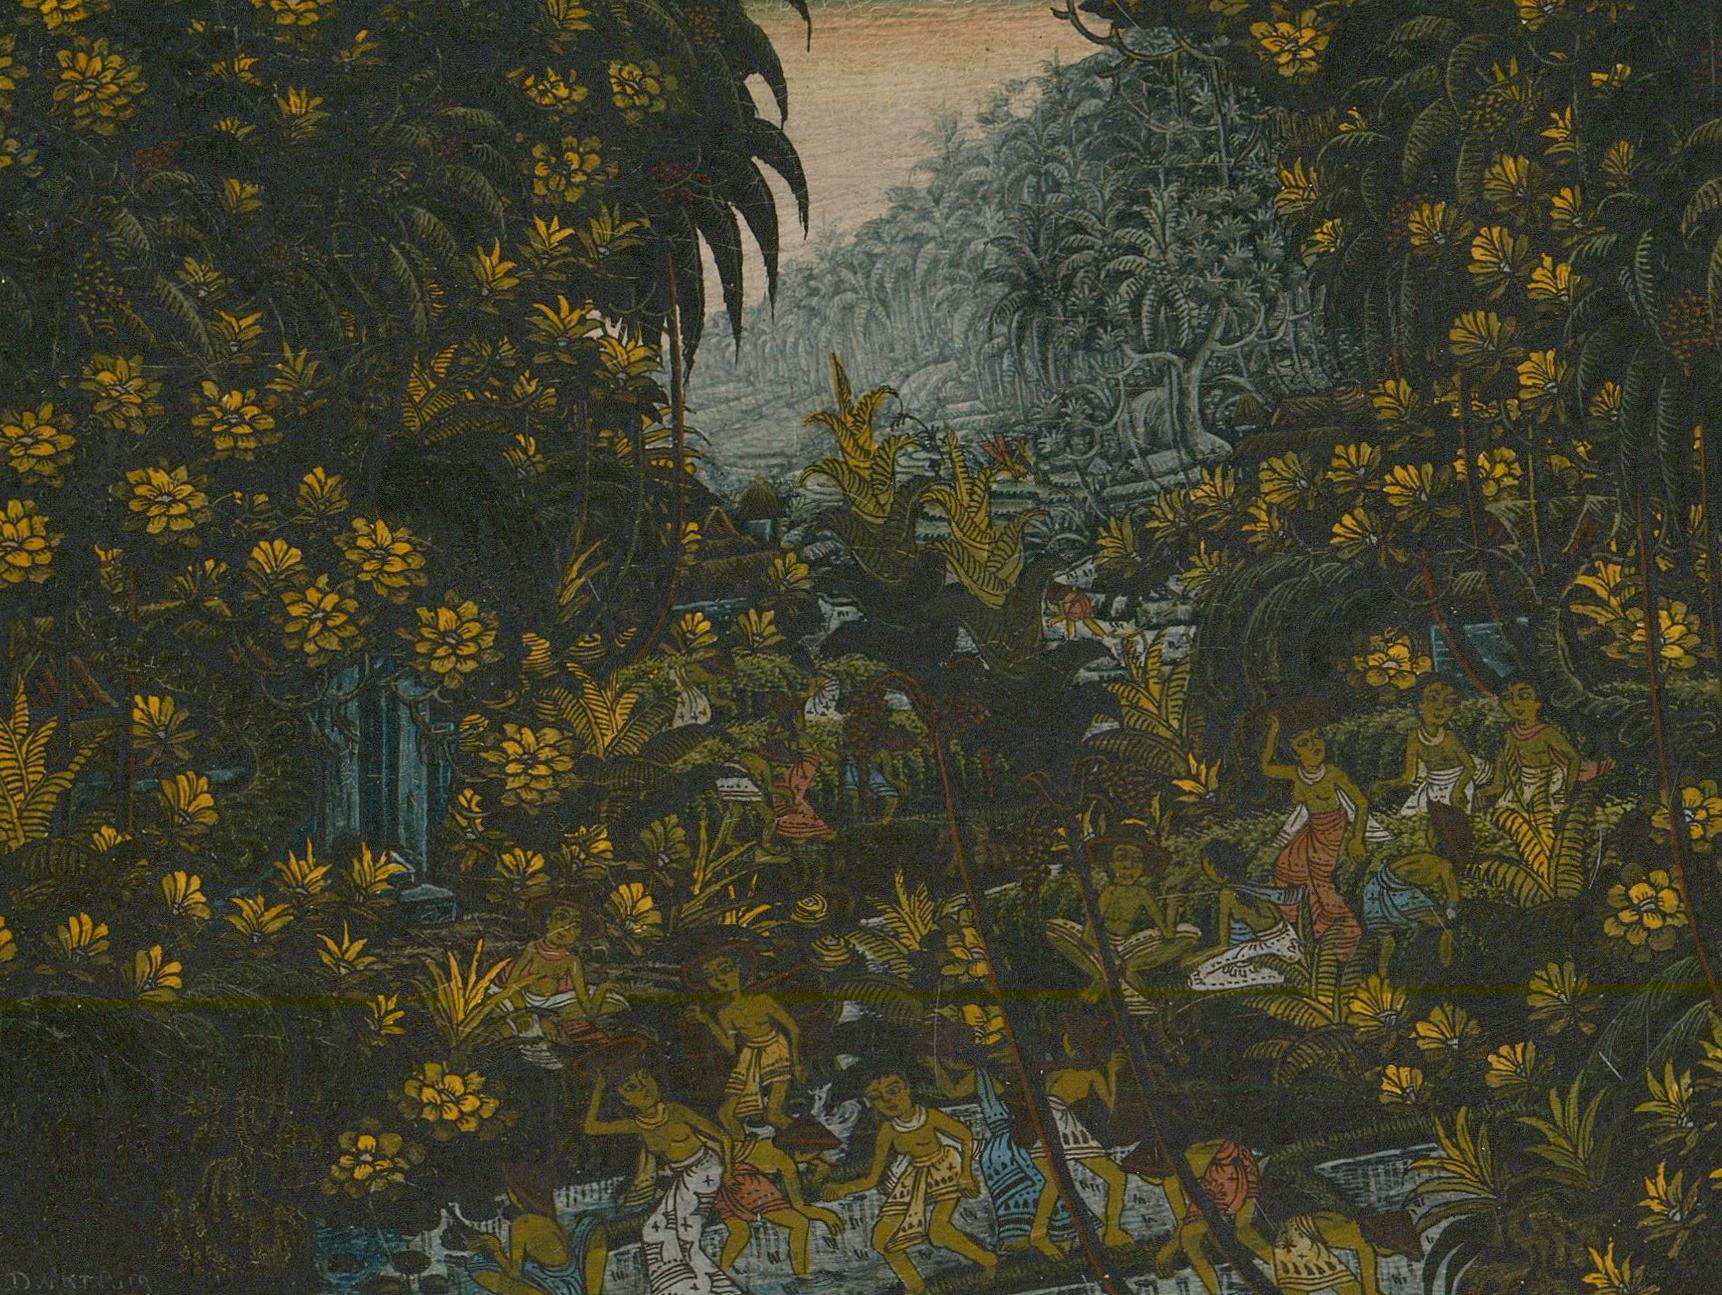 Balinese School 20th Century Watercolour - Jungle Landscape with Figures - Art by Unknown